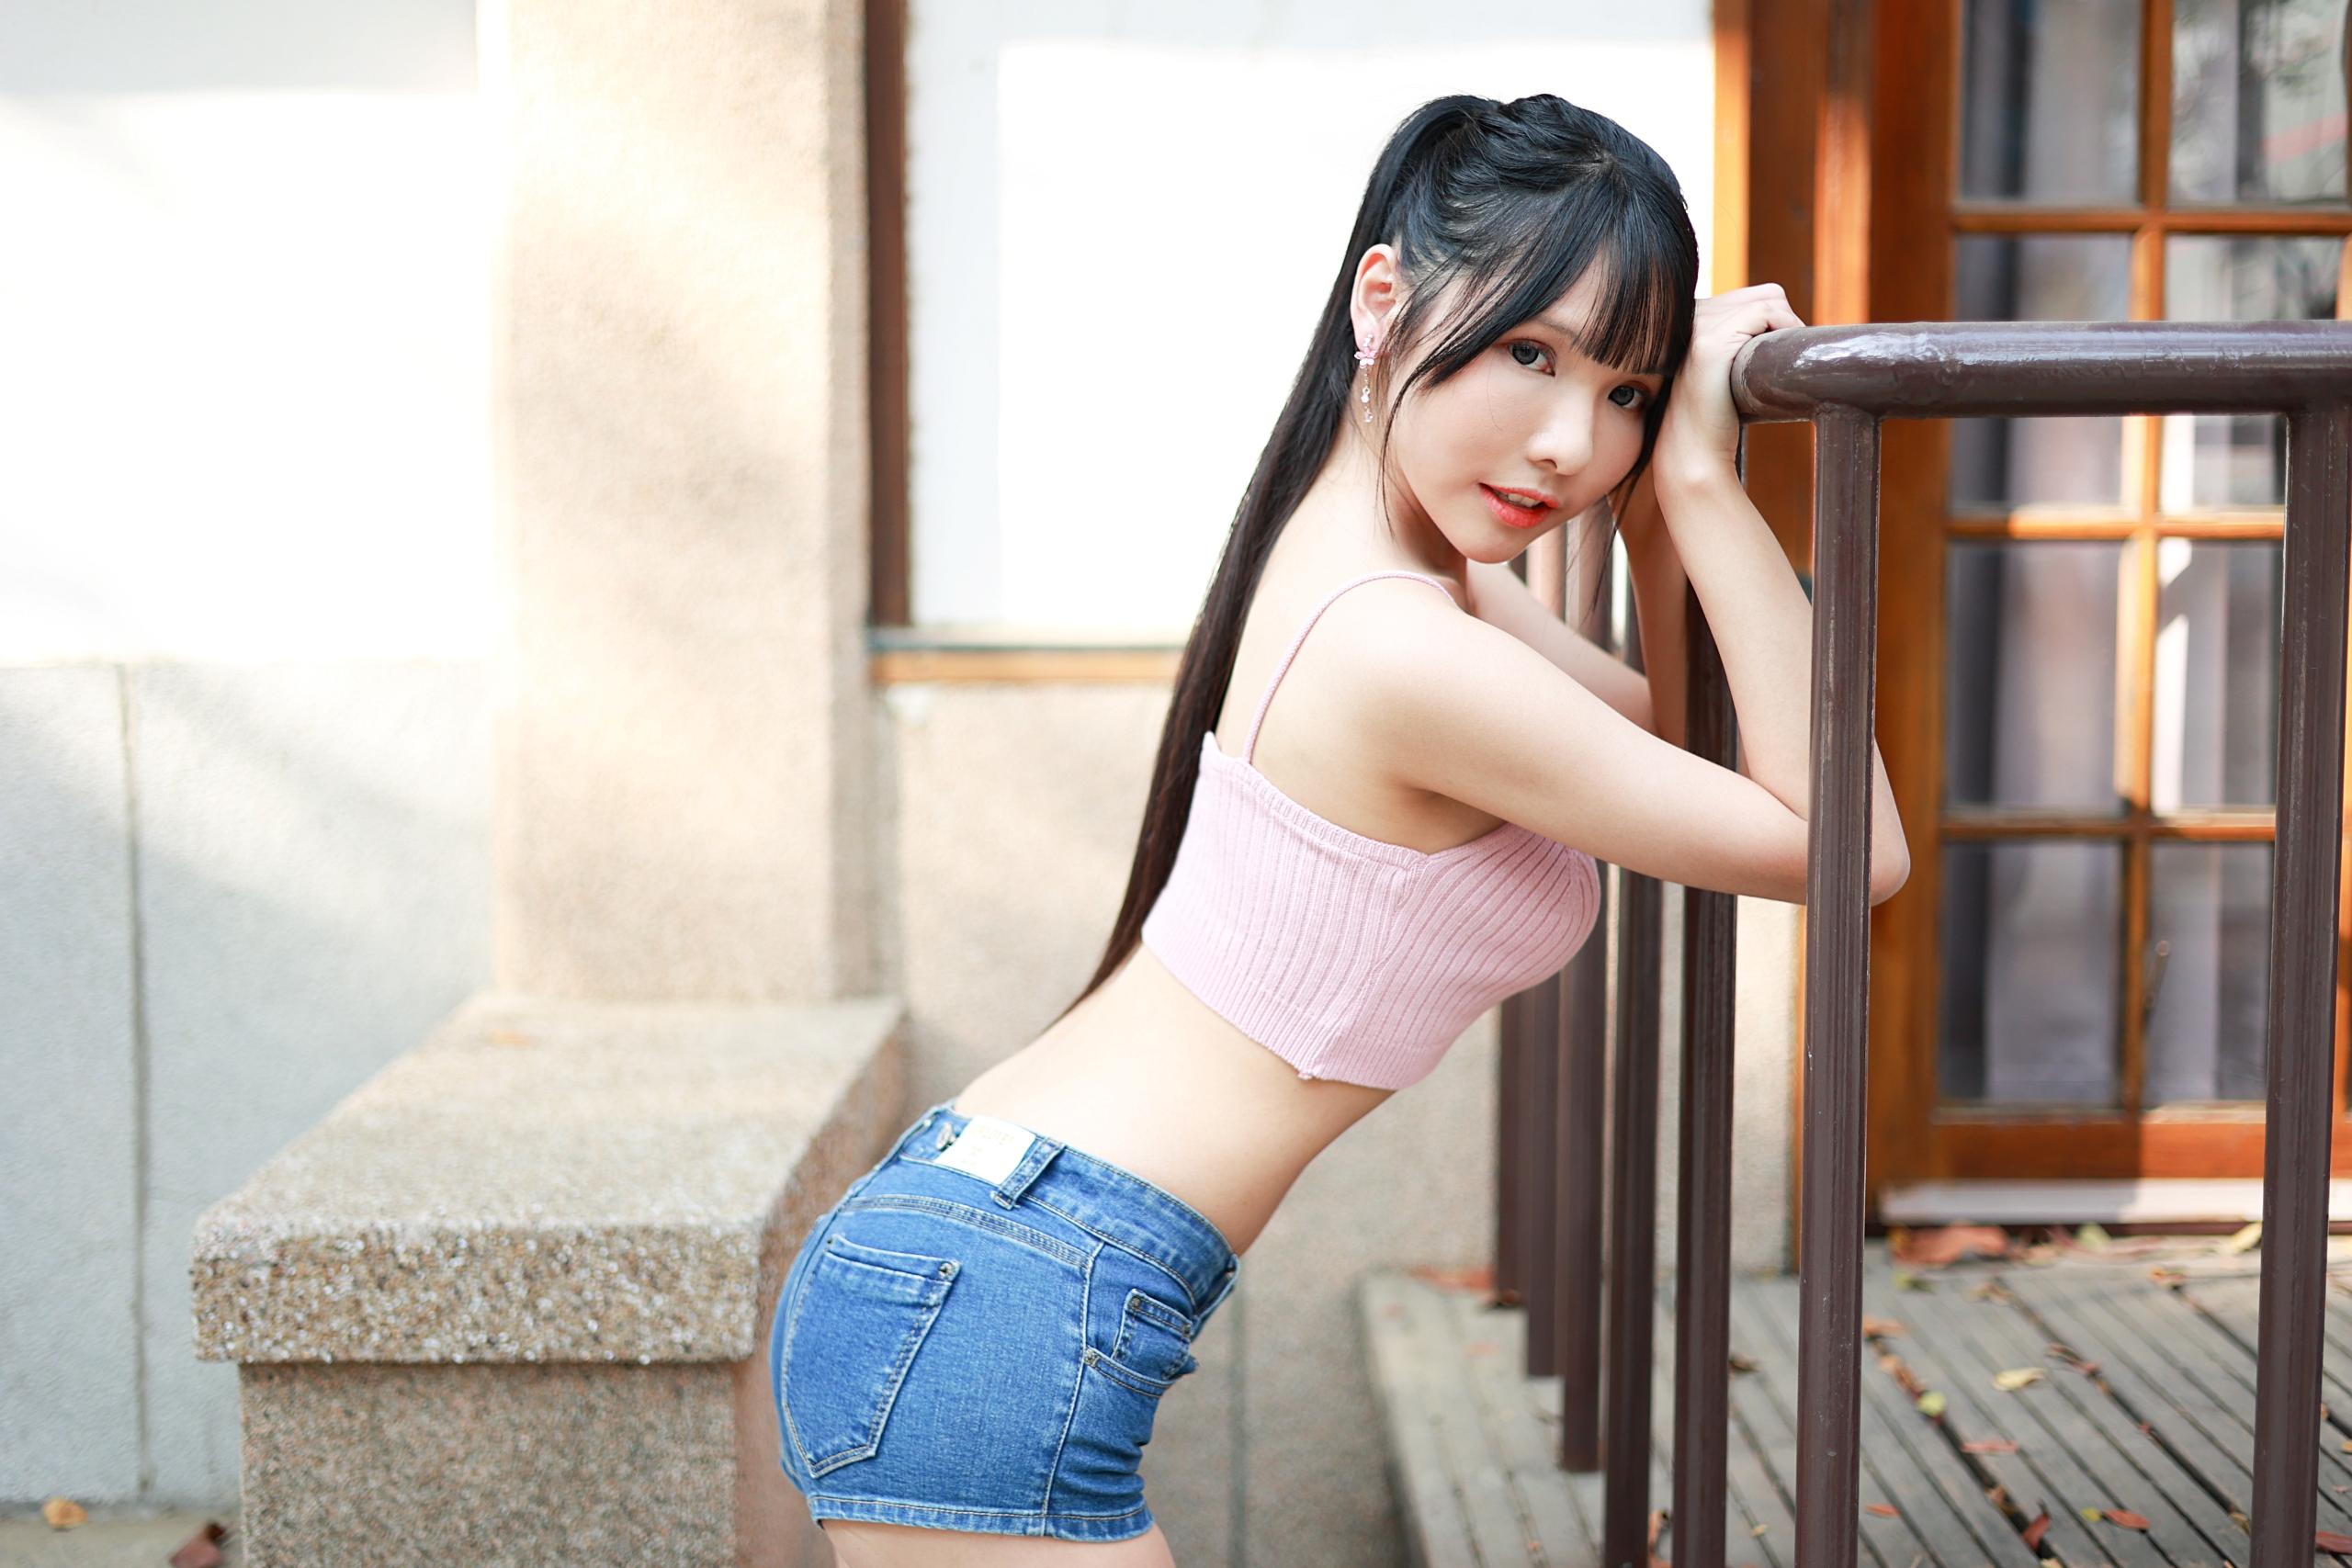 Vicky Women Model Brunette Asian Ponytail Bangs Looking At Viewer Parted Lips Pink Tops Portrait Out 2560x1707